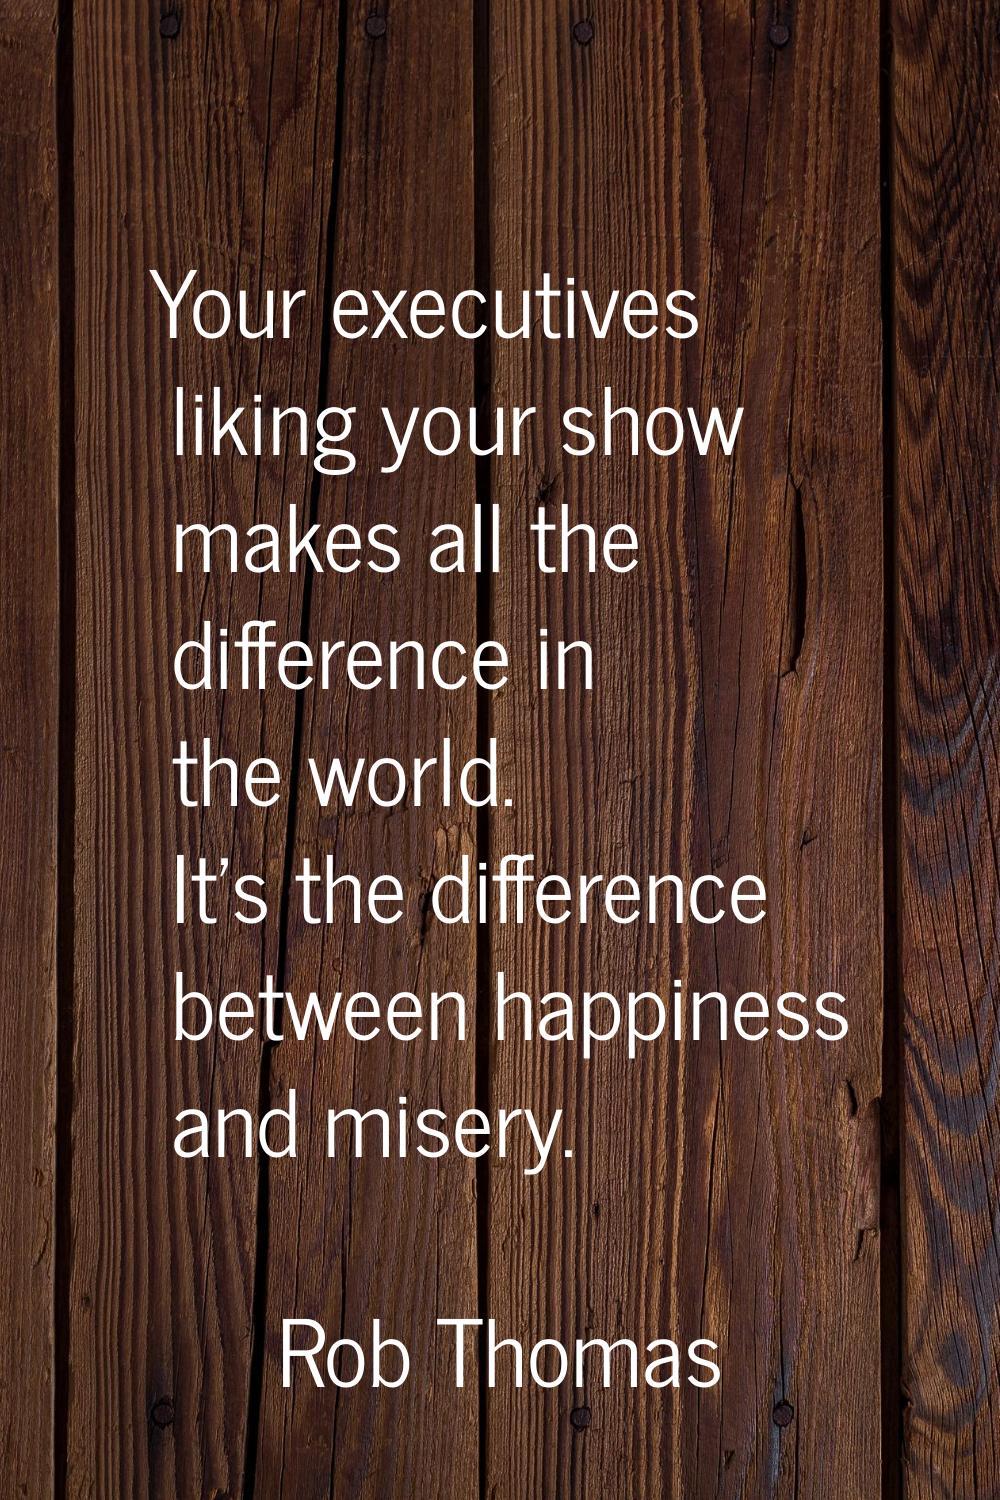 Your executives liking your show makes all the difference in the world. It's the difference between